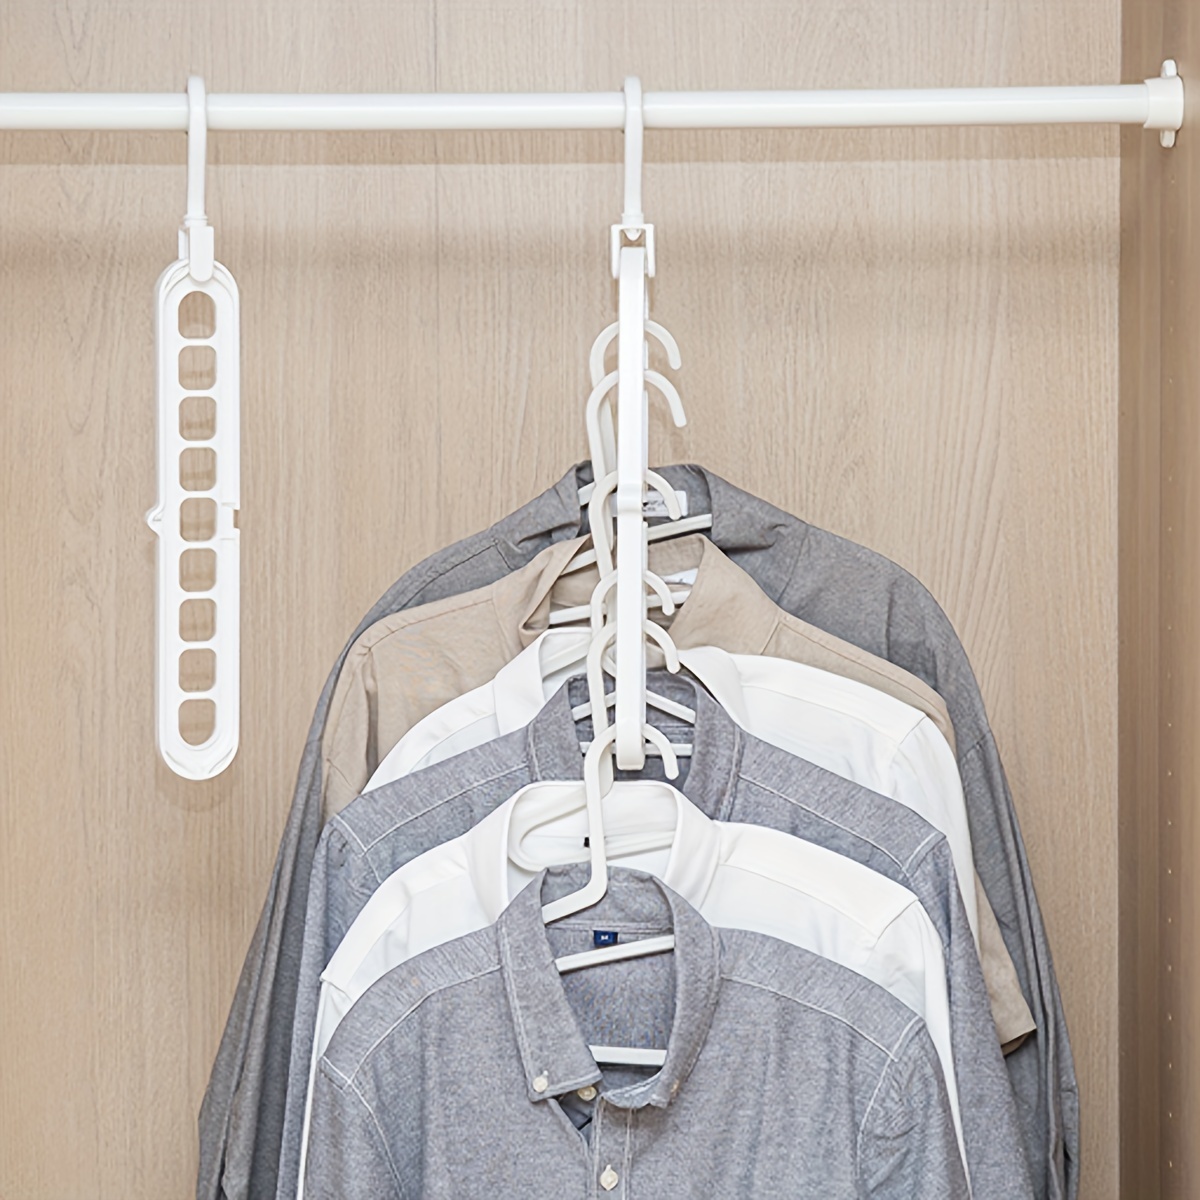 Multipurpose Movable Cloth Hanger- White in Central Division